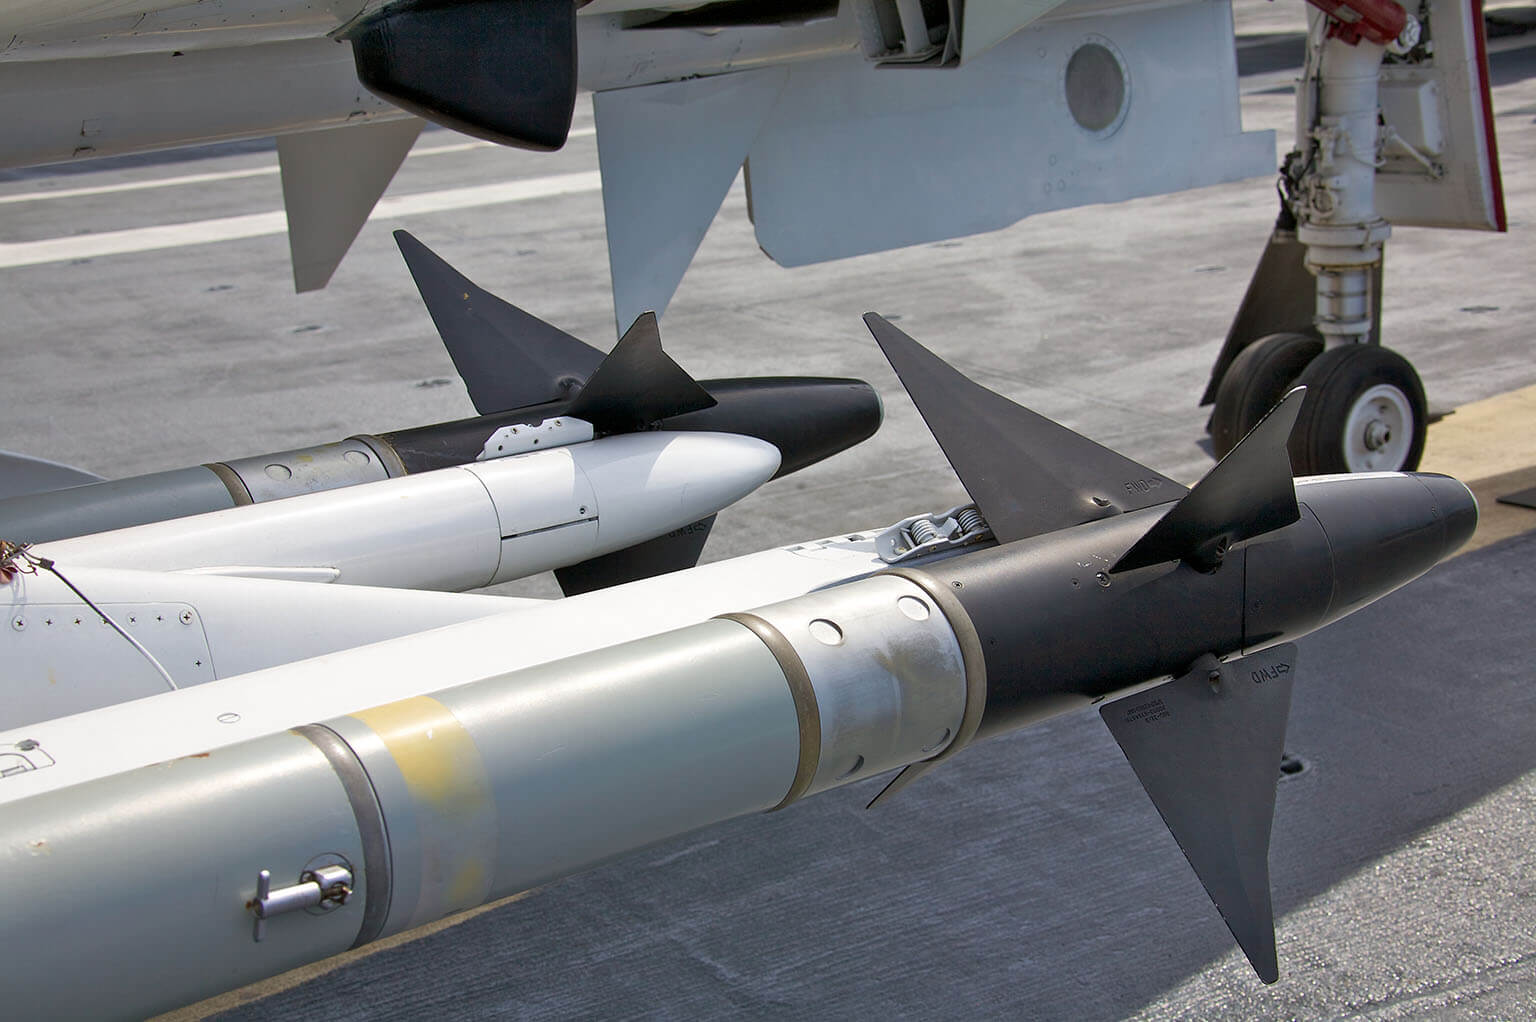 A missile system on a fighter jet.